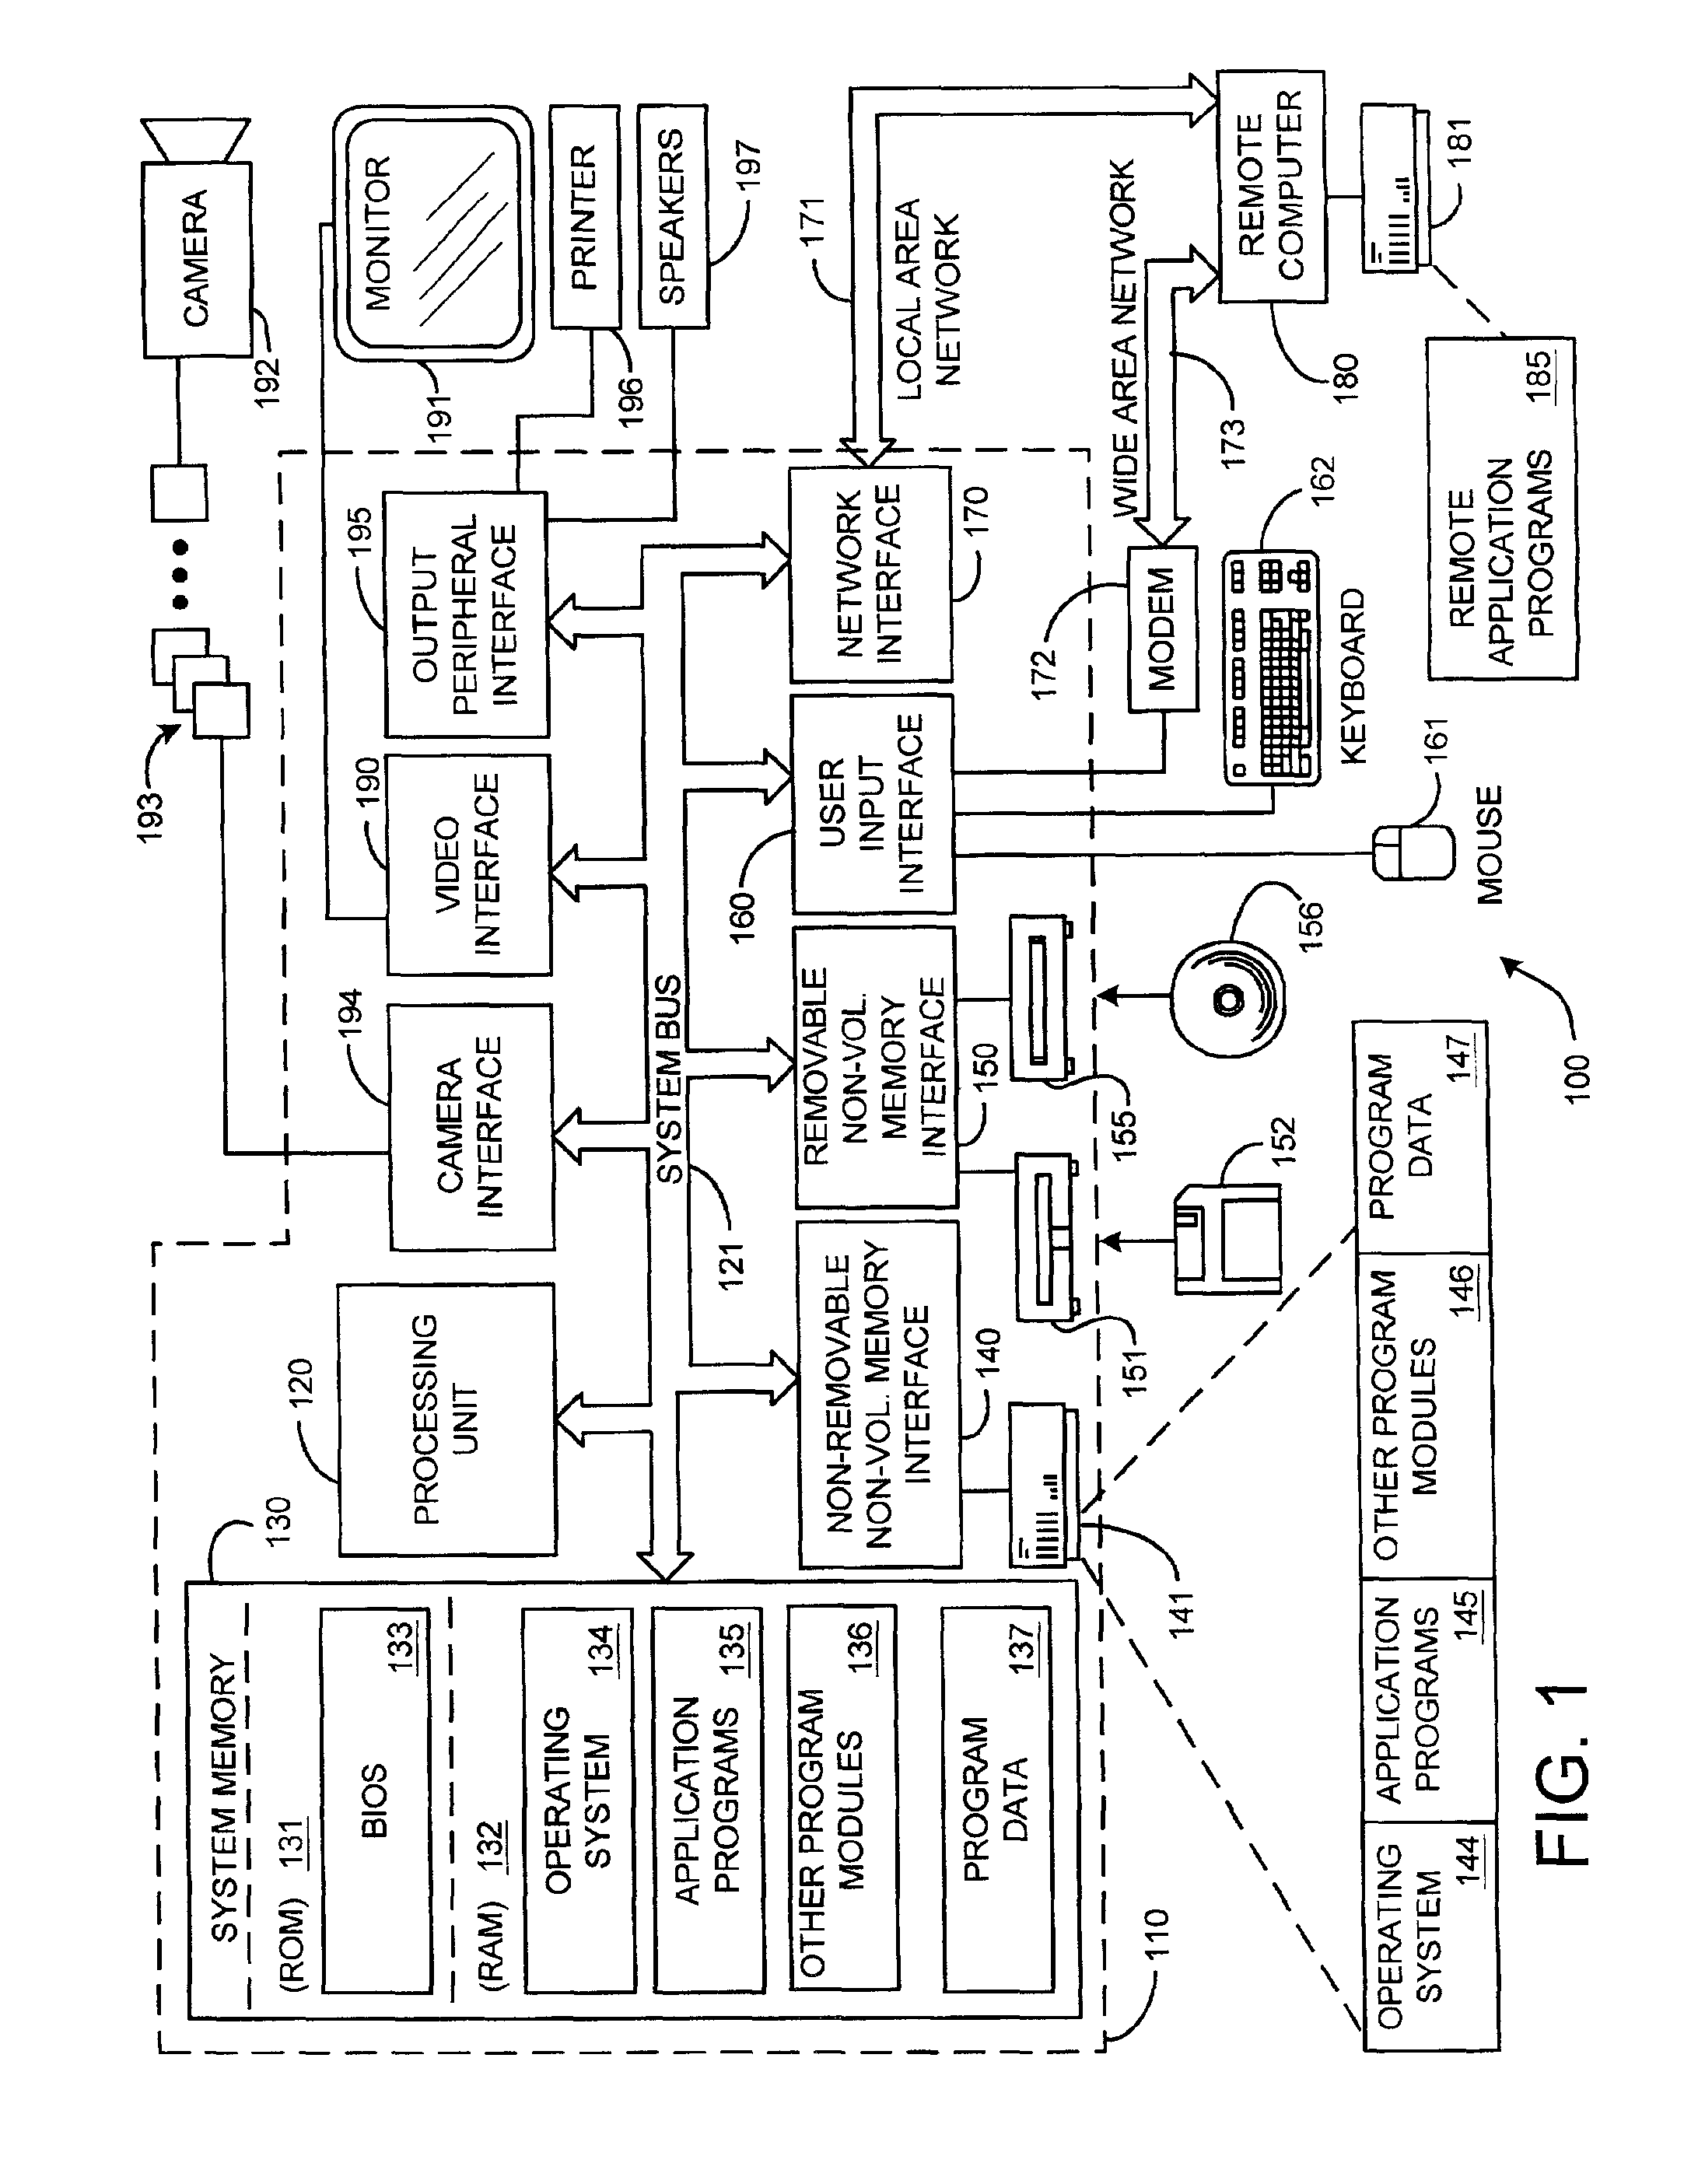 System and method for image compression using wavelet coding of masked images